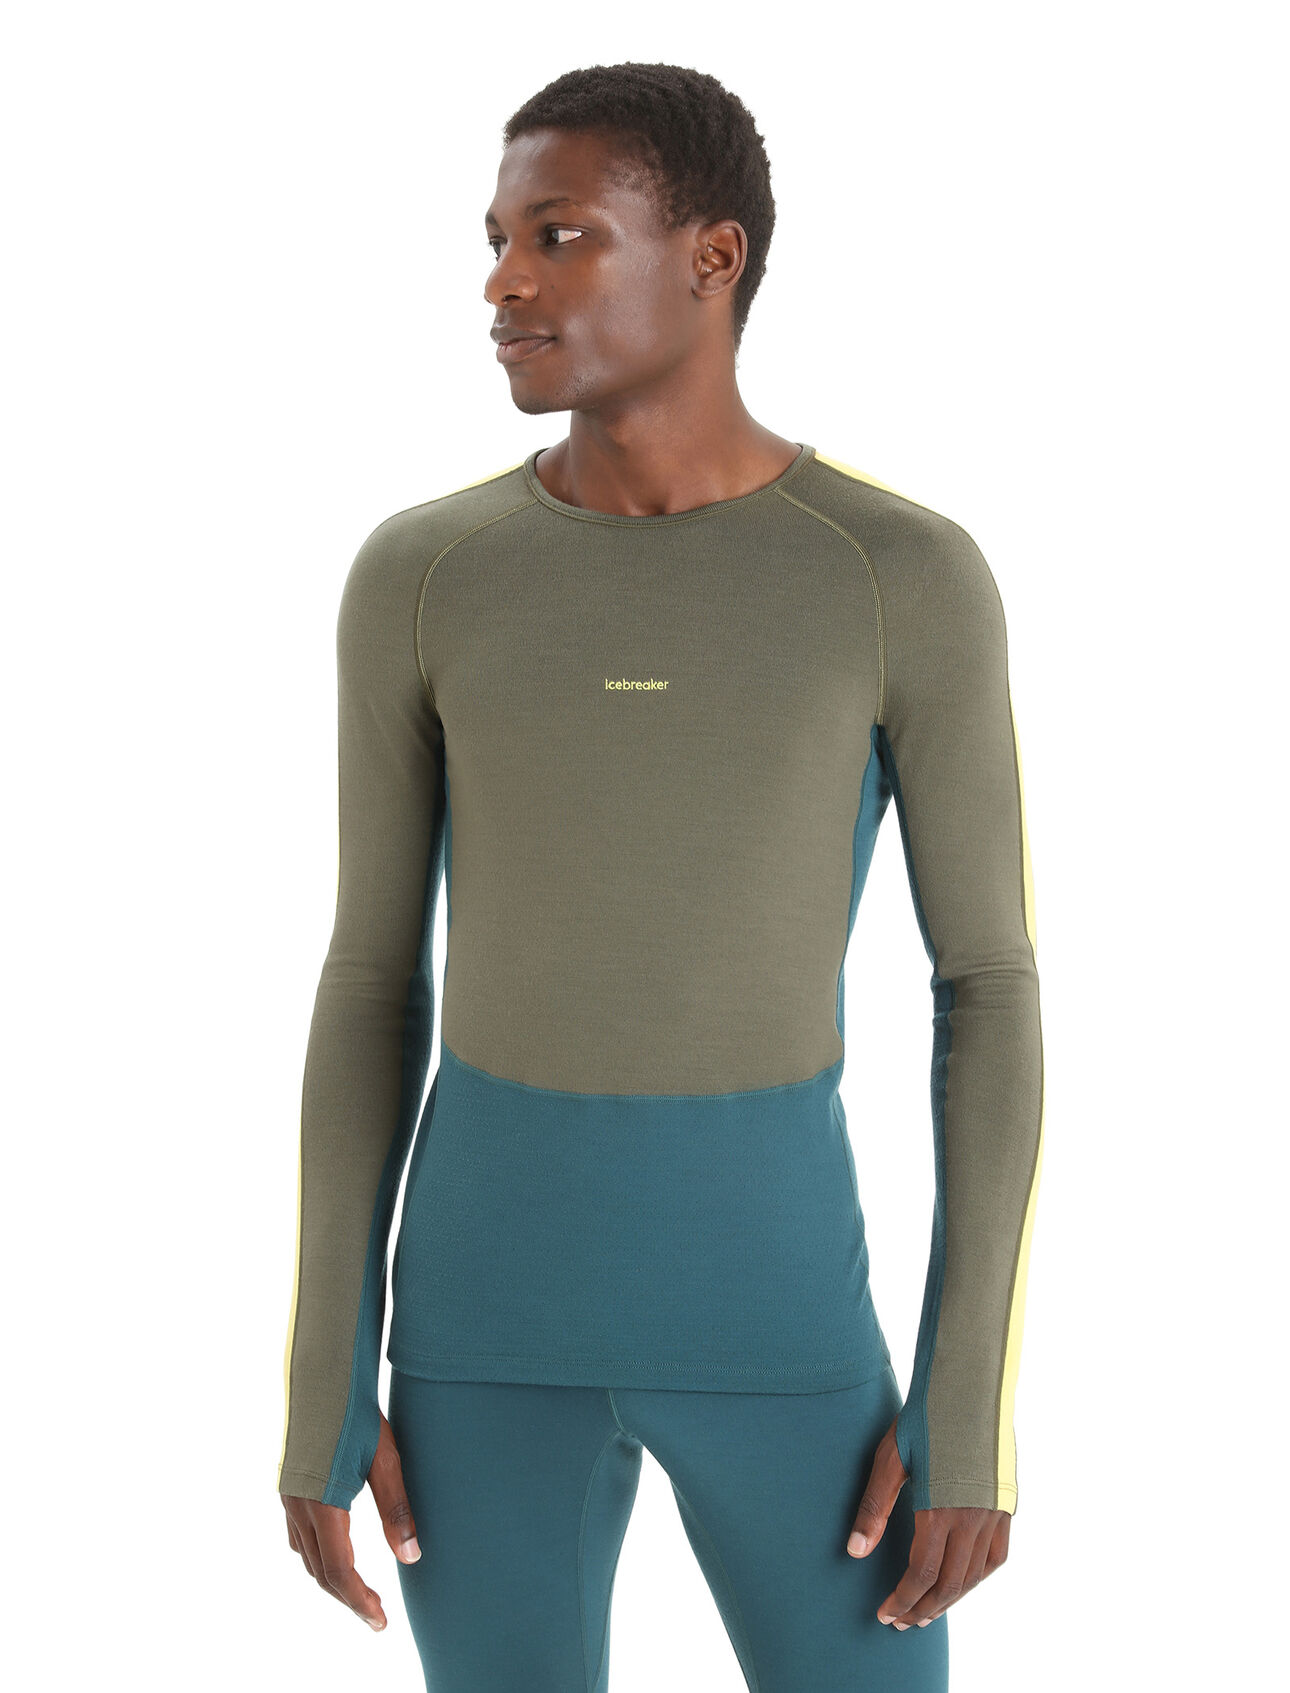 Mens 260 ZoneKnit™ Merino Long Sleeve Crewe Thermal Top A heavyweight merino base layer top designed to help regulate temperature during high-intensity activity, the 260 ZoneKnit™ Long Sleeve Crewe features 100% pure and natural merino wool.